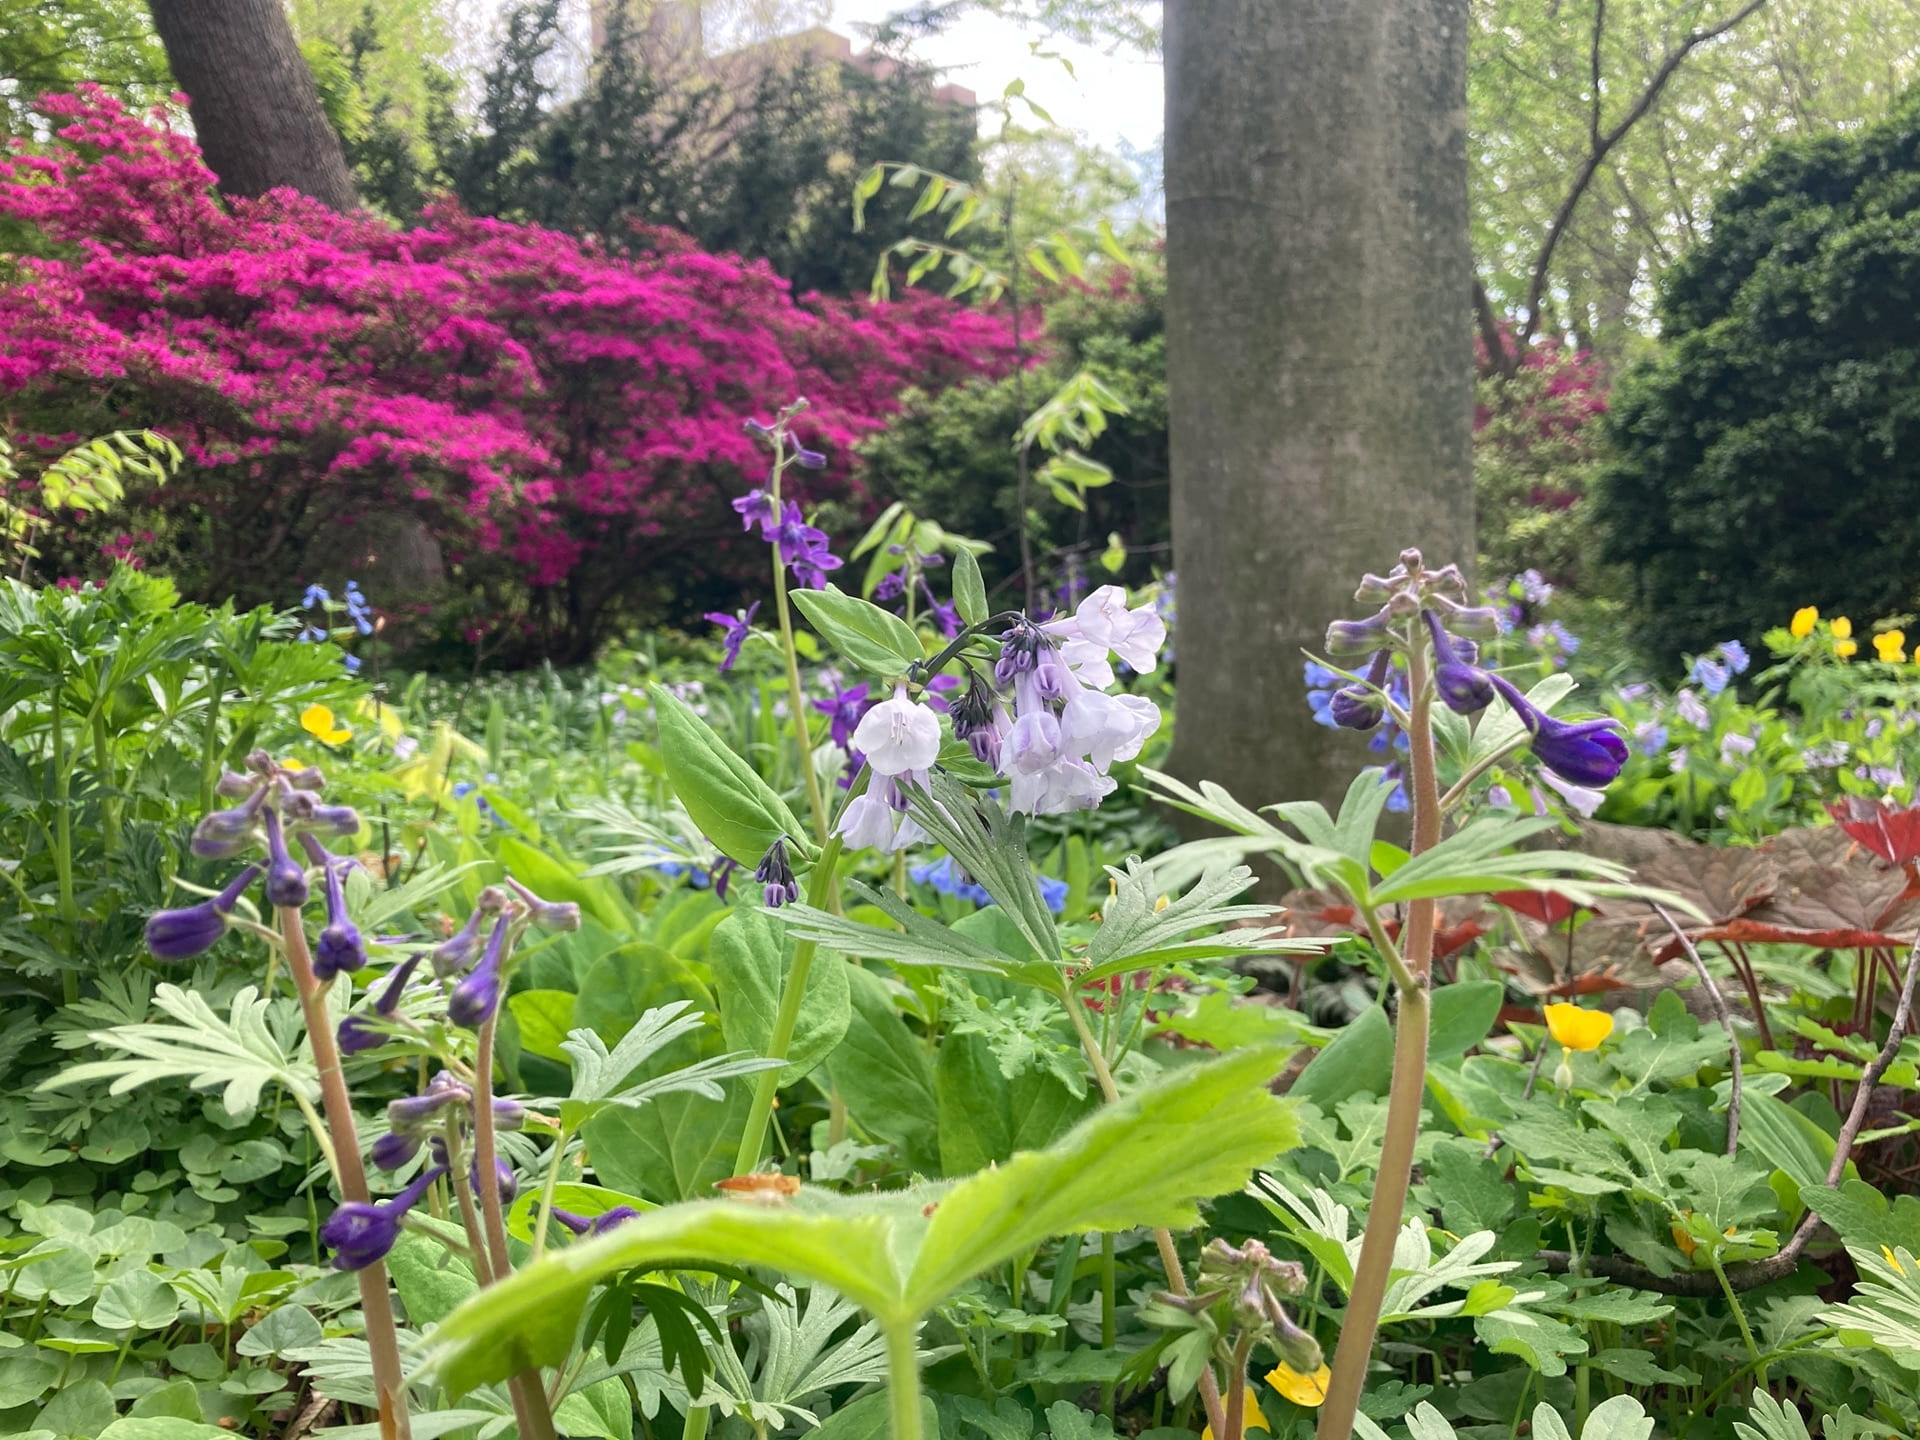 A mixture of native spring blooming plants, Delphinium tricorne, Mertensia virginica, and Stylophorum diphyllum, amongst a backdrop of azaleas.